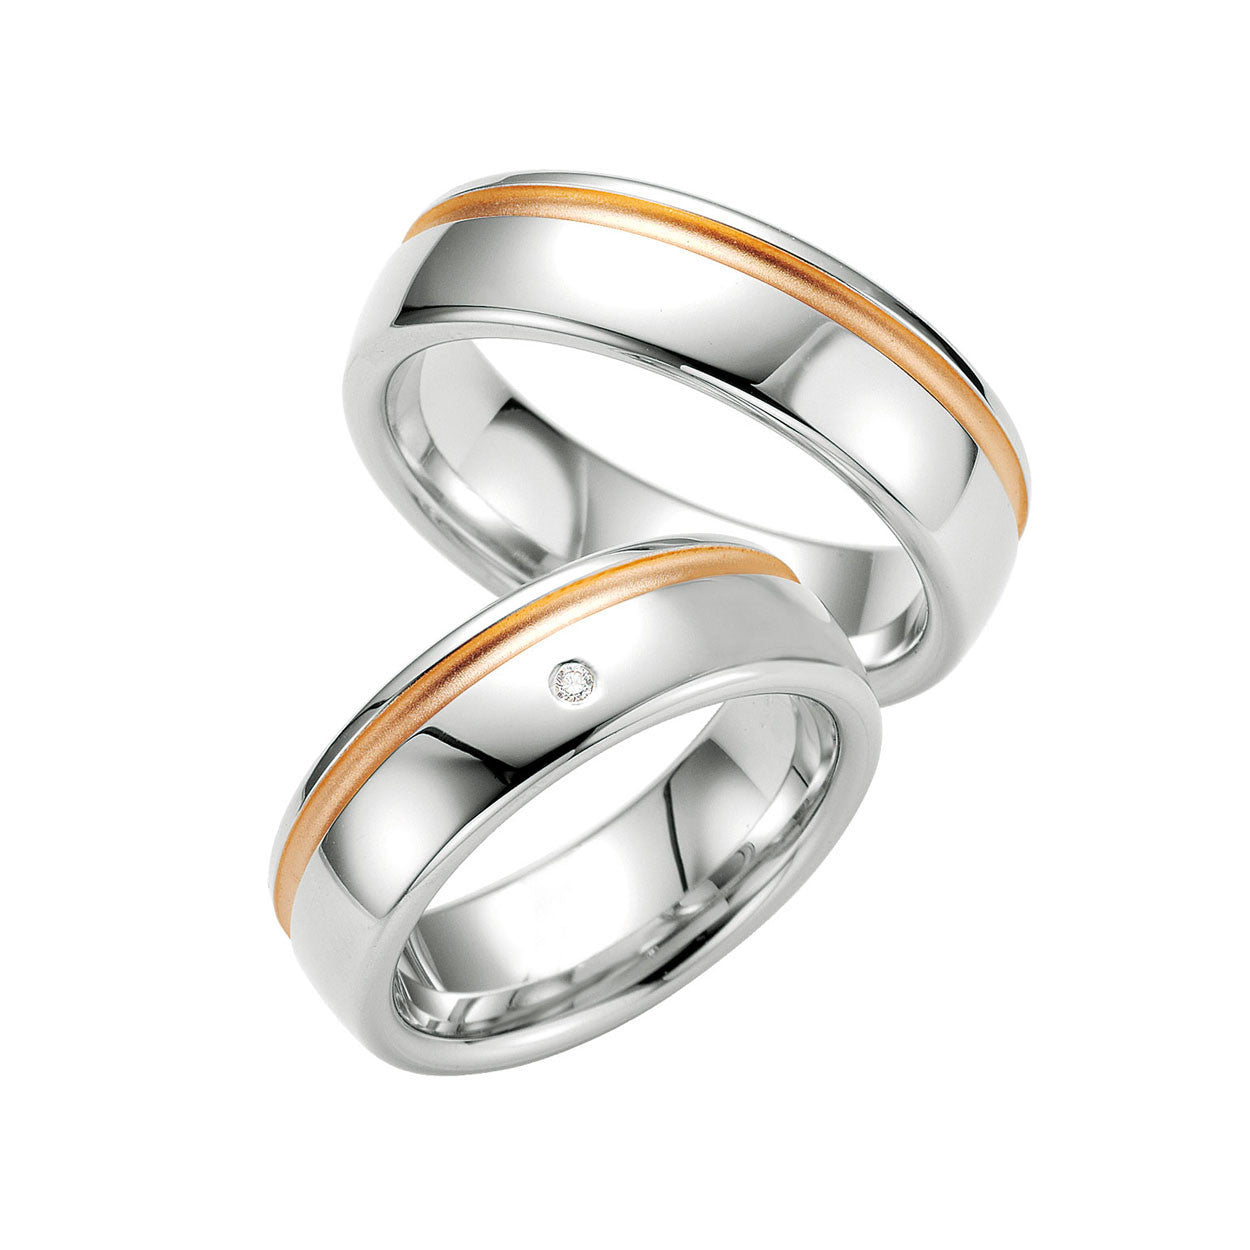 Breuning Mens Sterling Silver, Diamond, and Rose Gold